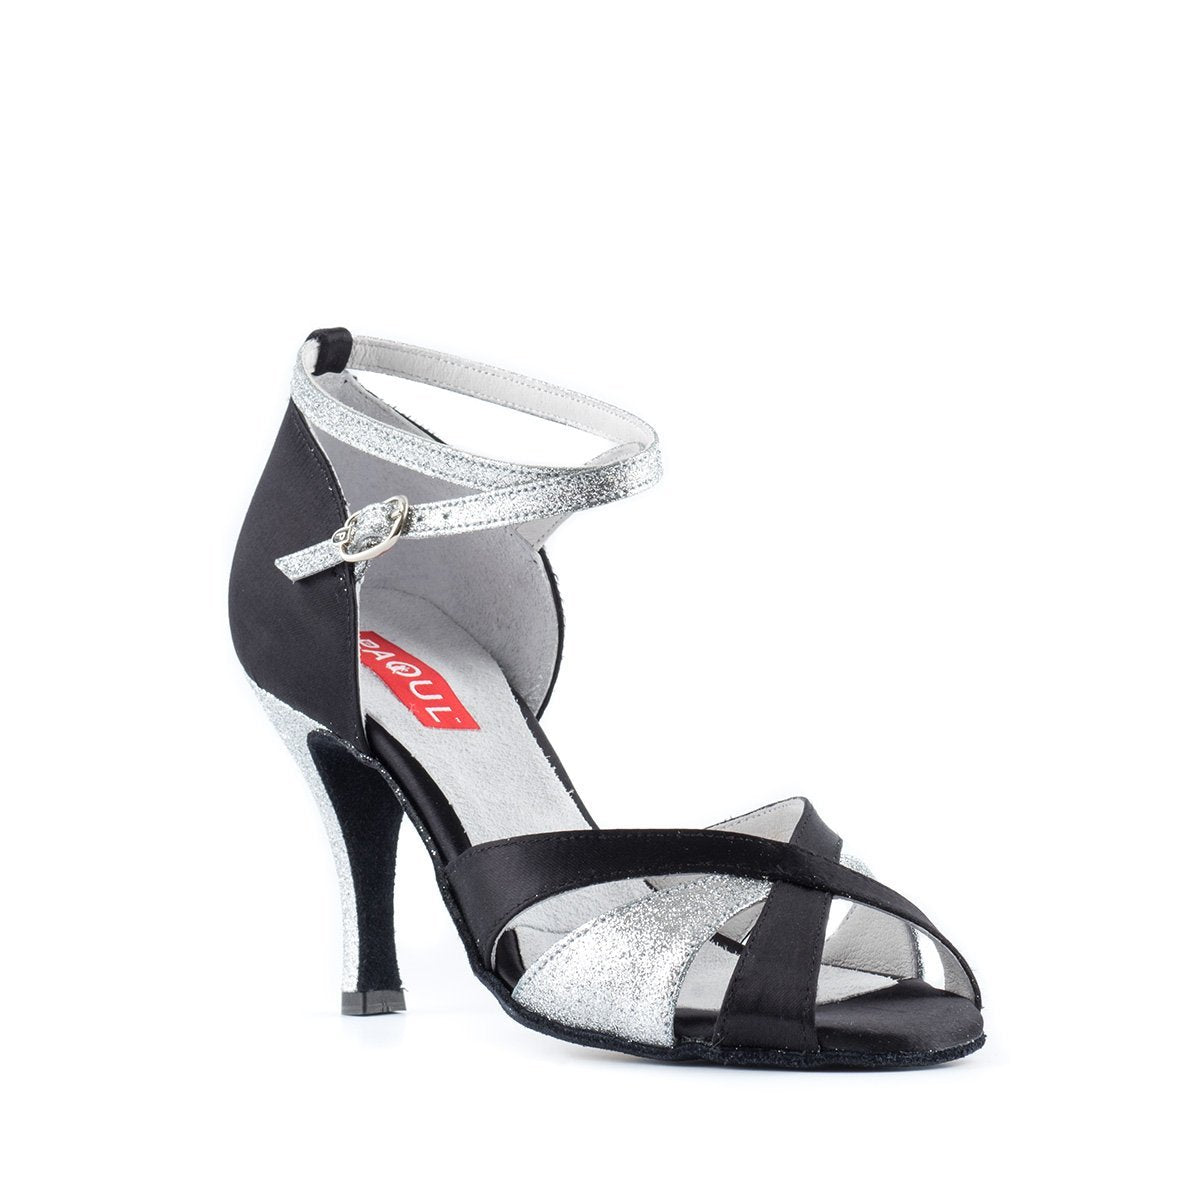 Women's Argentine tango dance shoe in black and silver